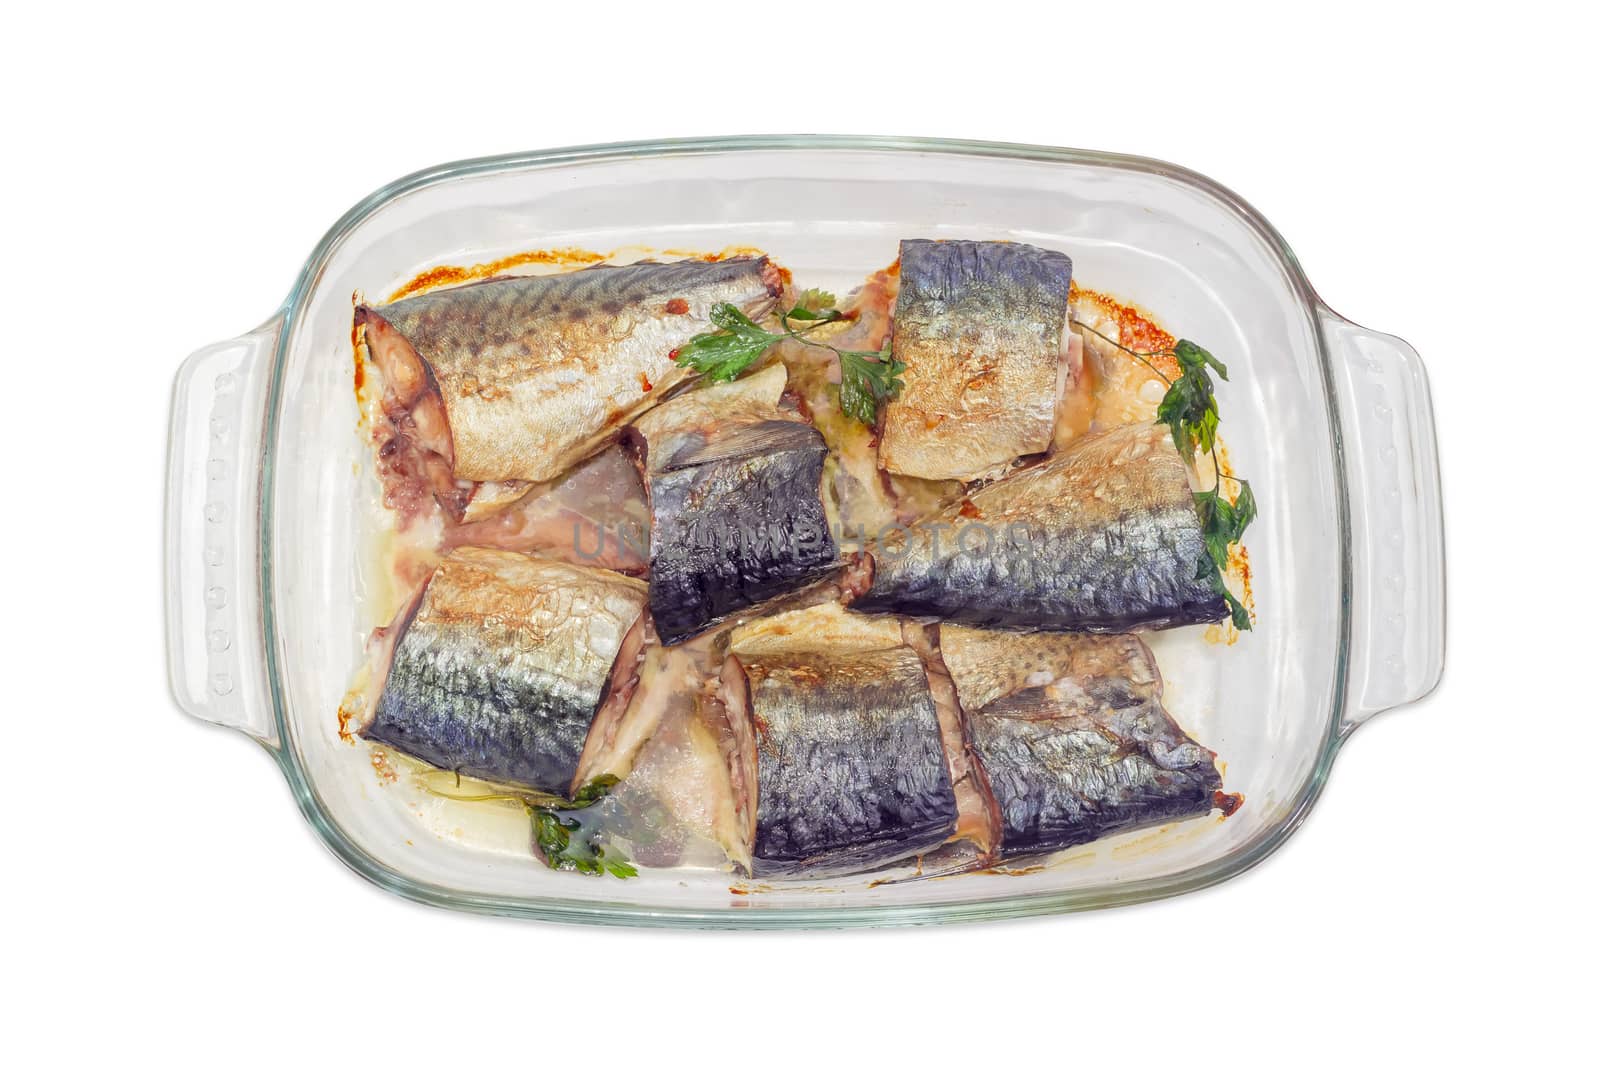 Baked Atlantic chub mackerel in the glass pan for baking by anmbph